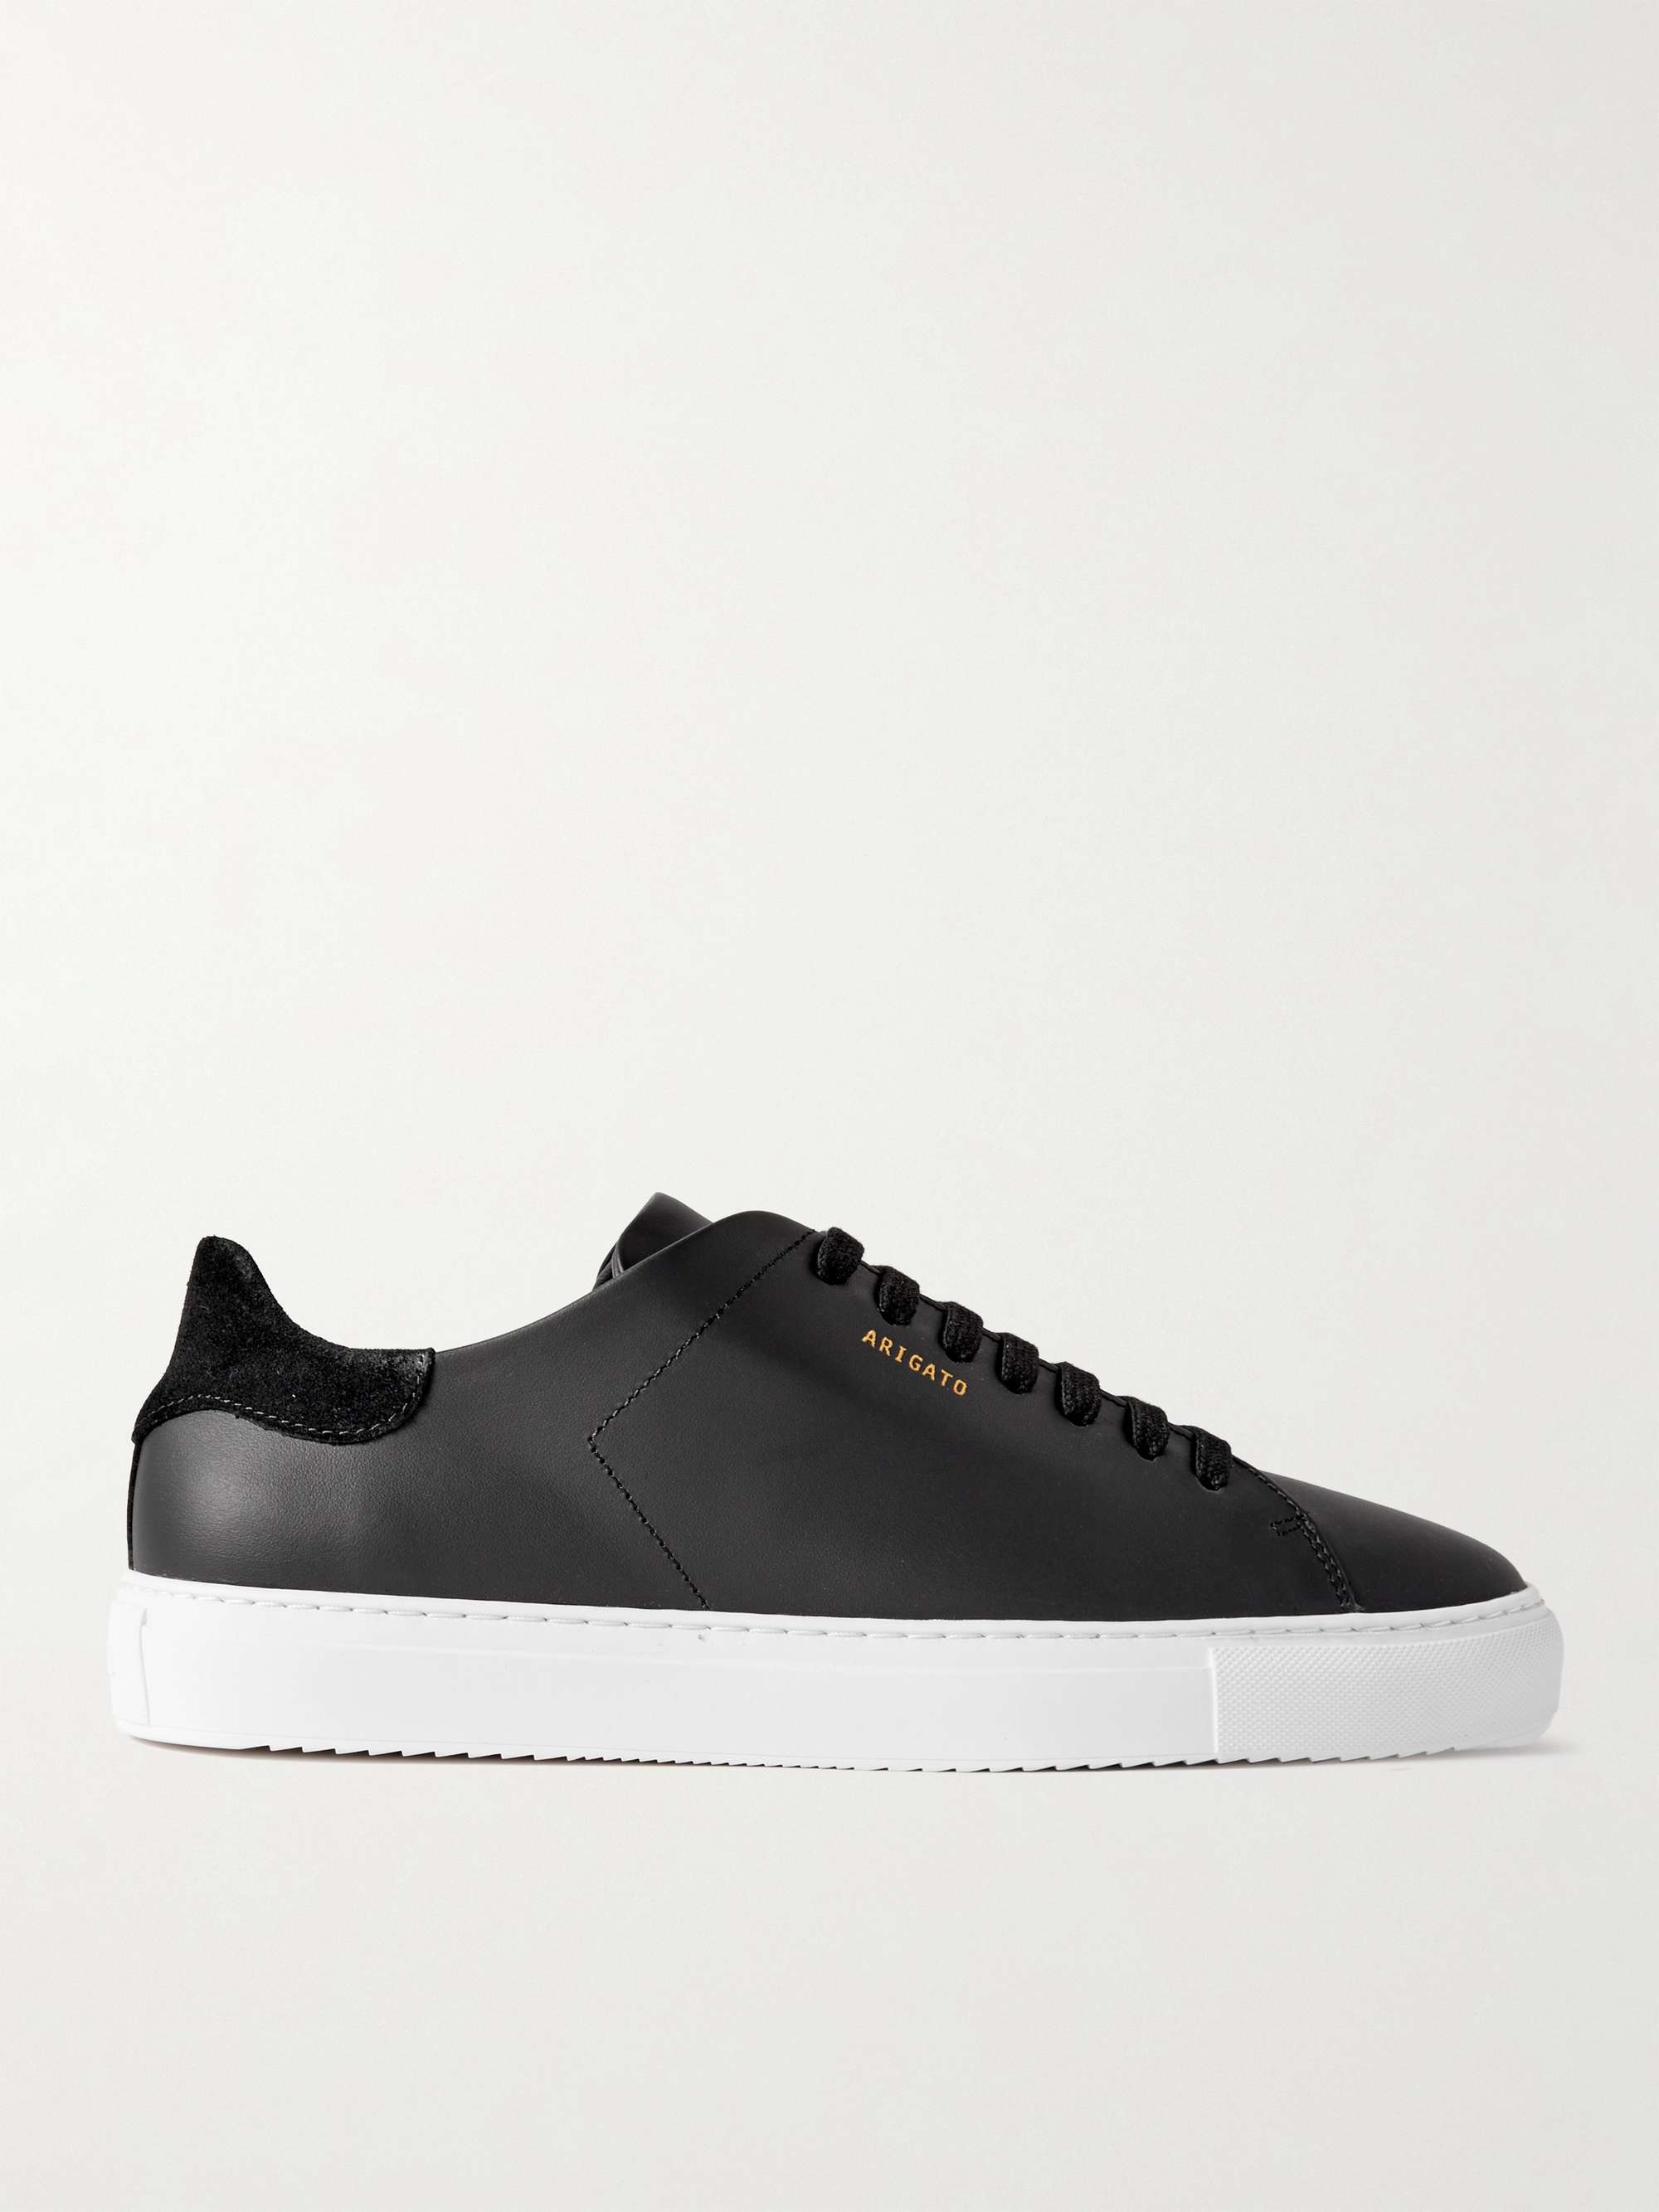 AXEL ARIGATO Clean 90 Leather Sneakers for Men | MR PORTER